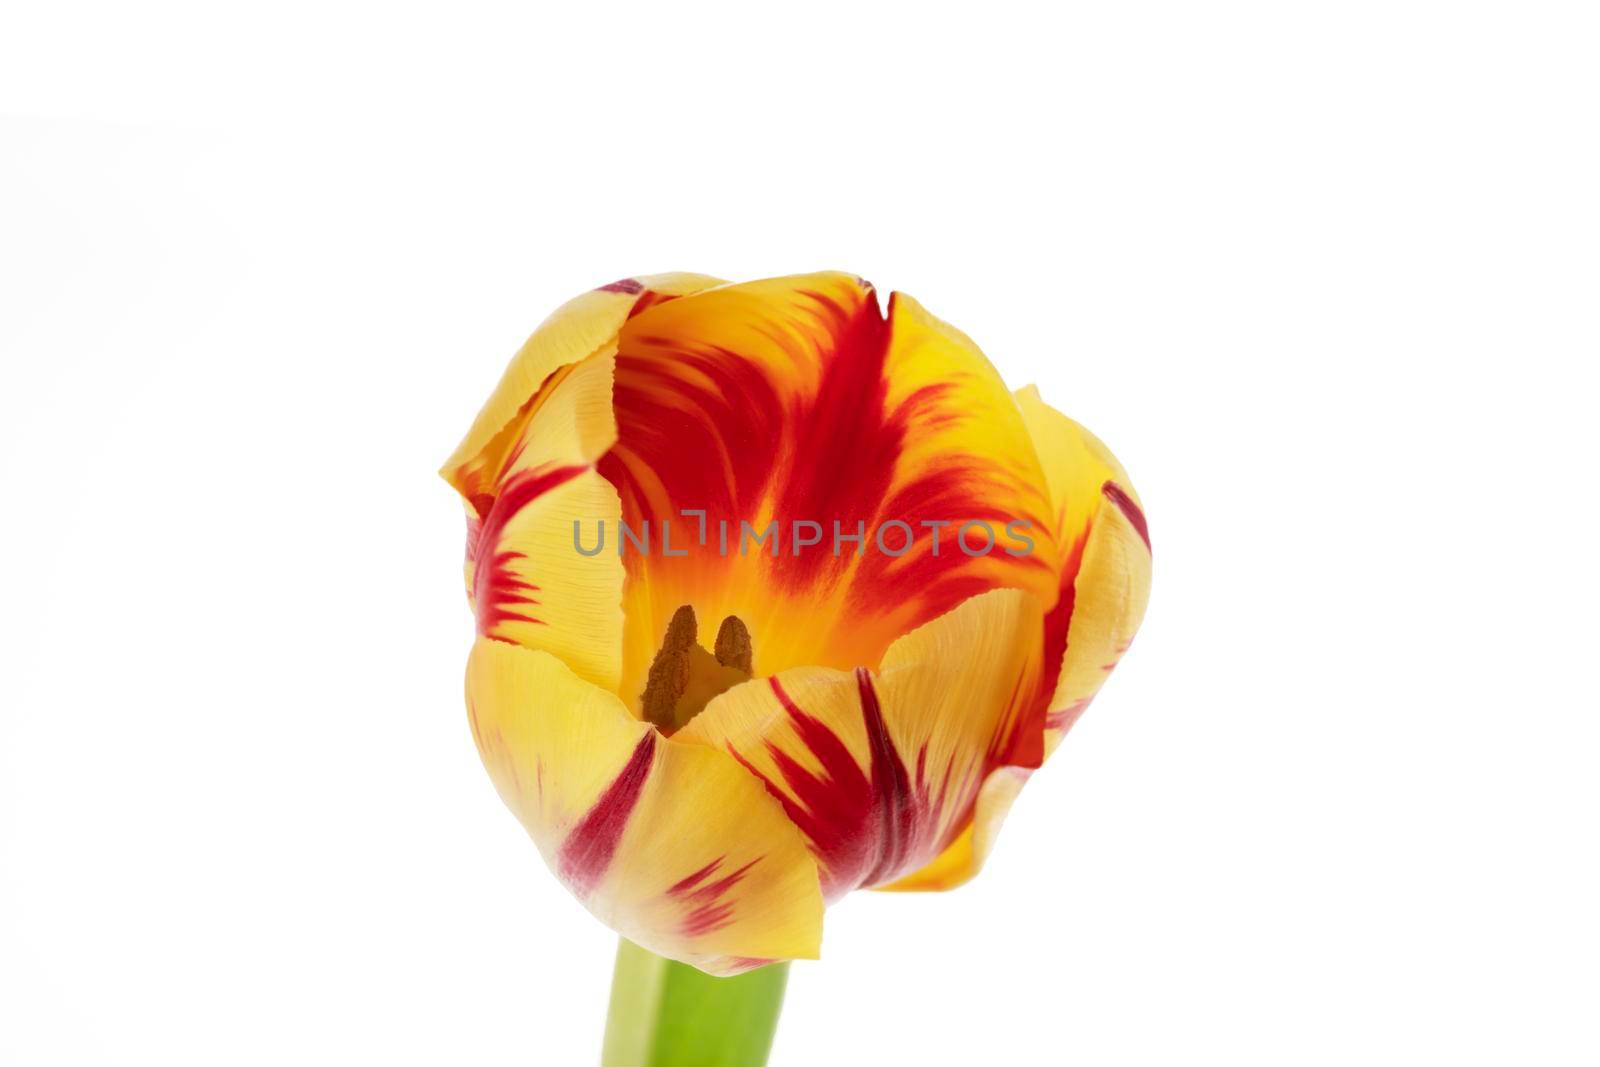 Close up or tulip flower showing pistel and stamen, isolated on white.